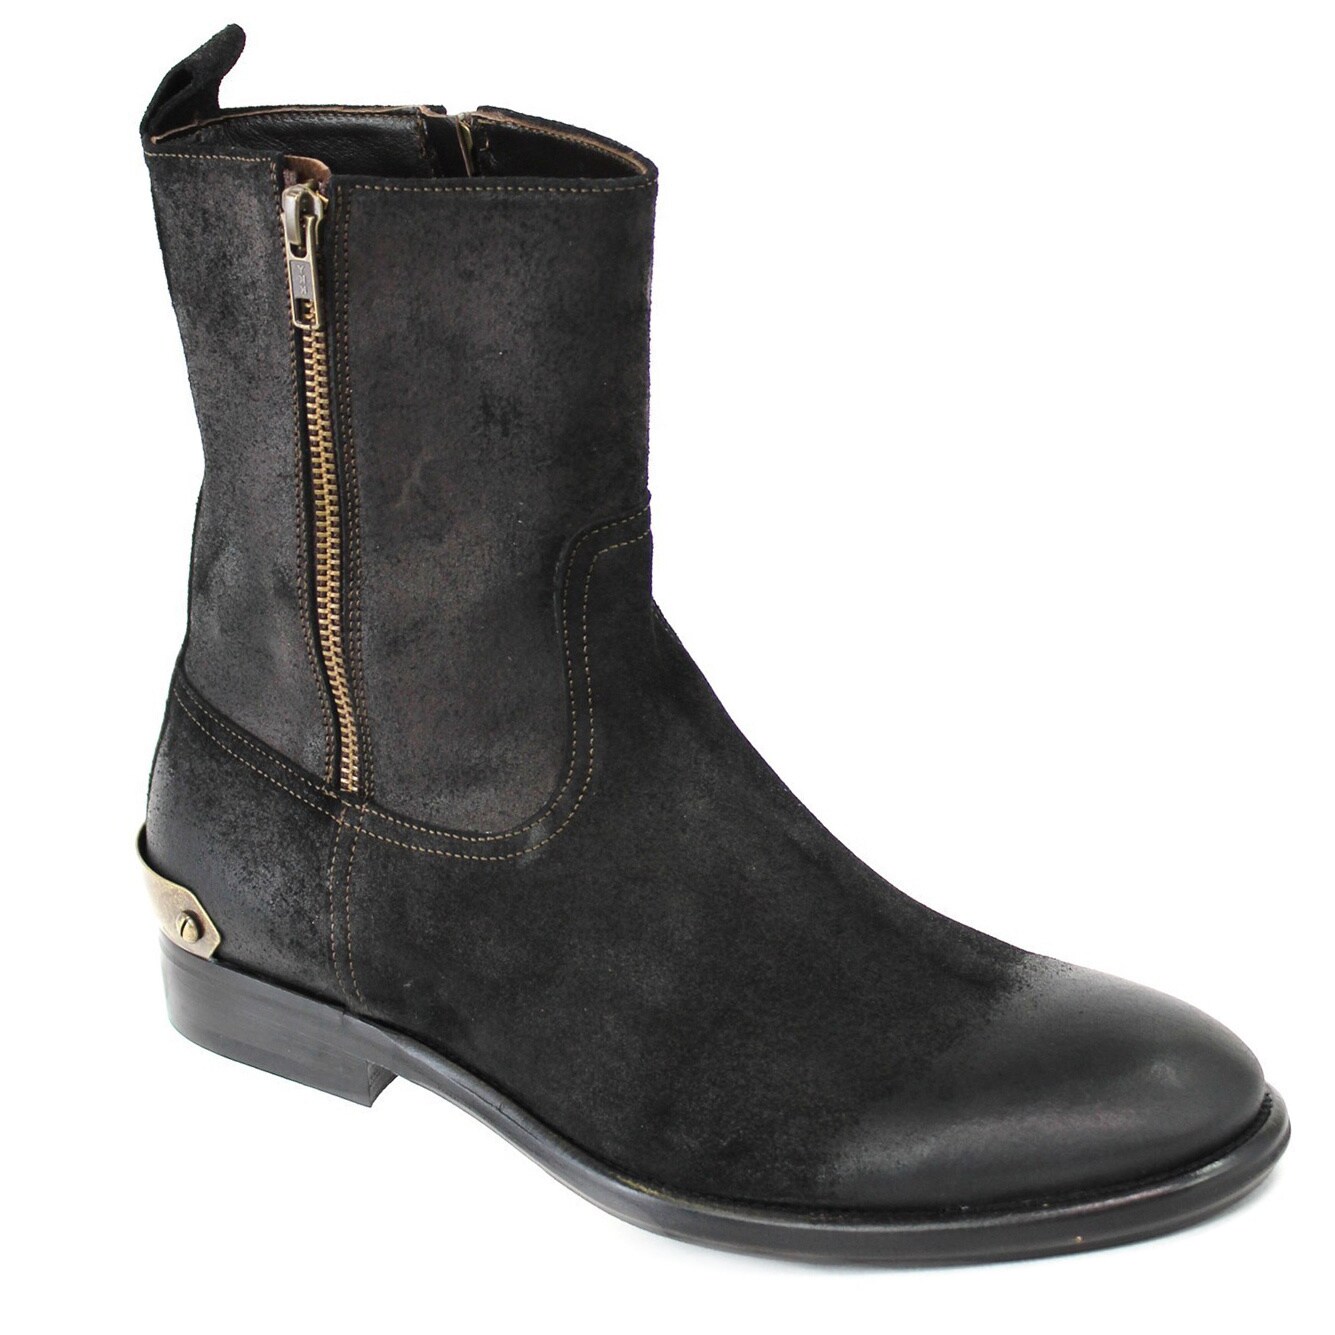 Galliano Mens Suede Black Boots Today $430.99